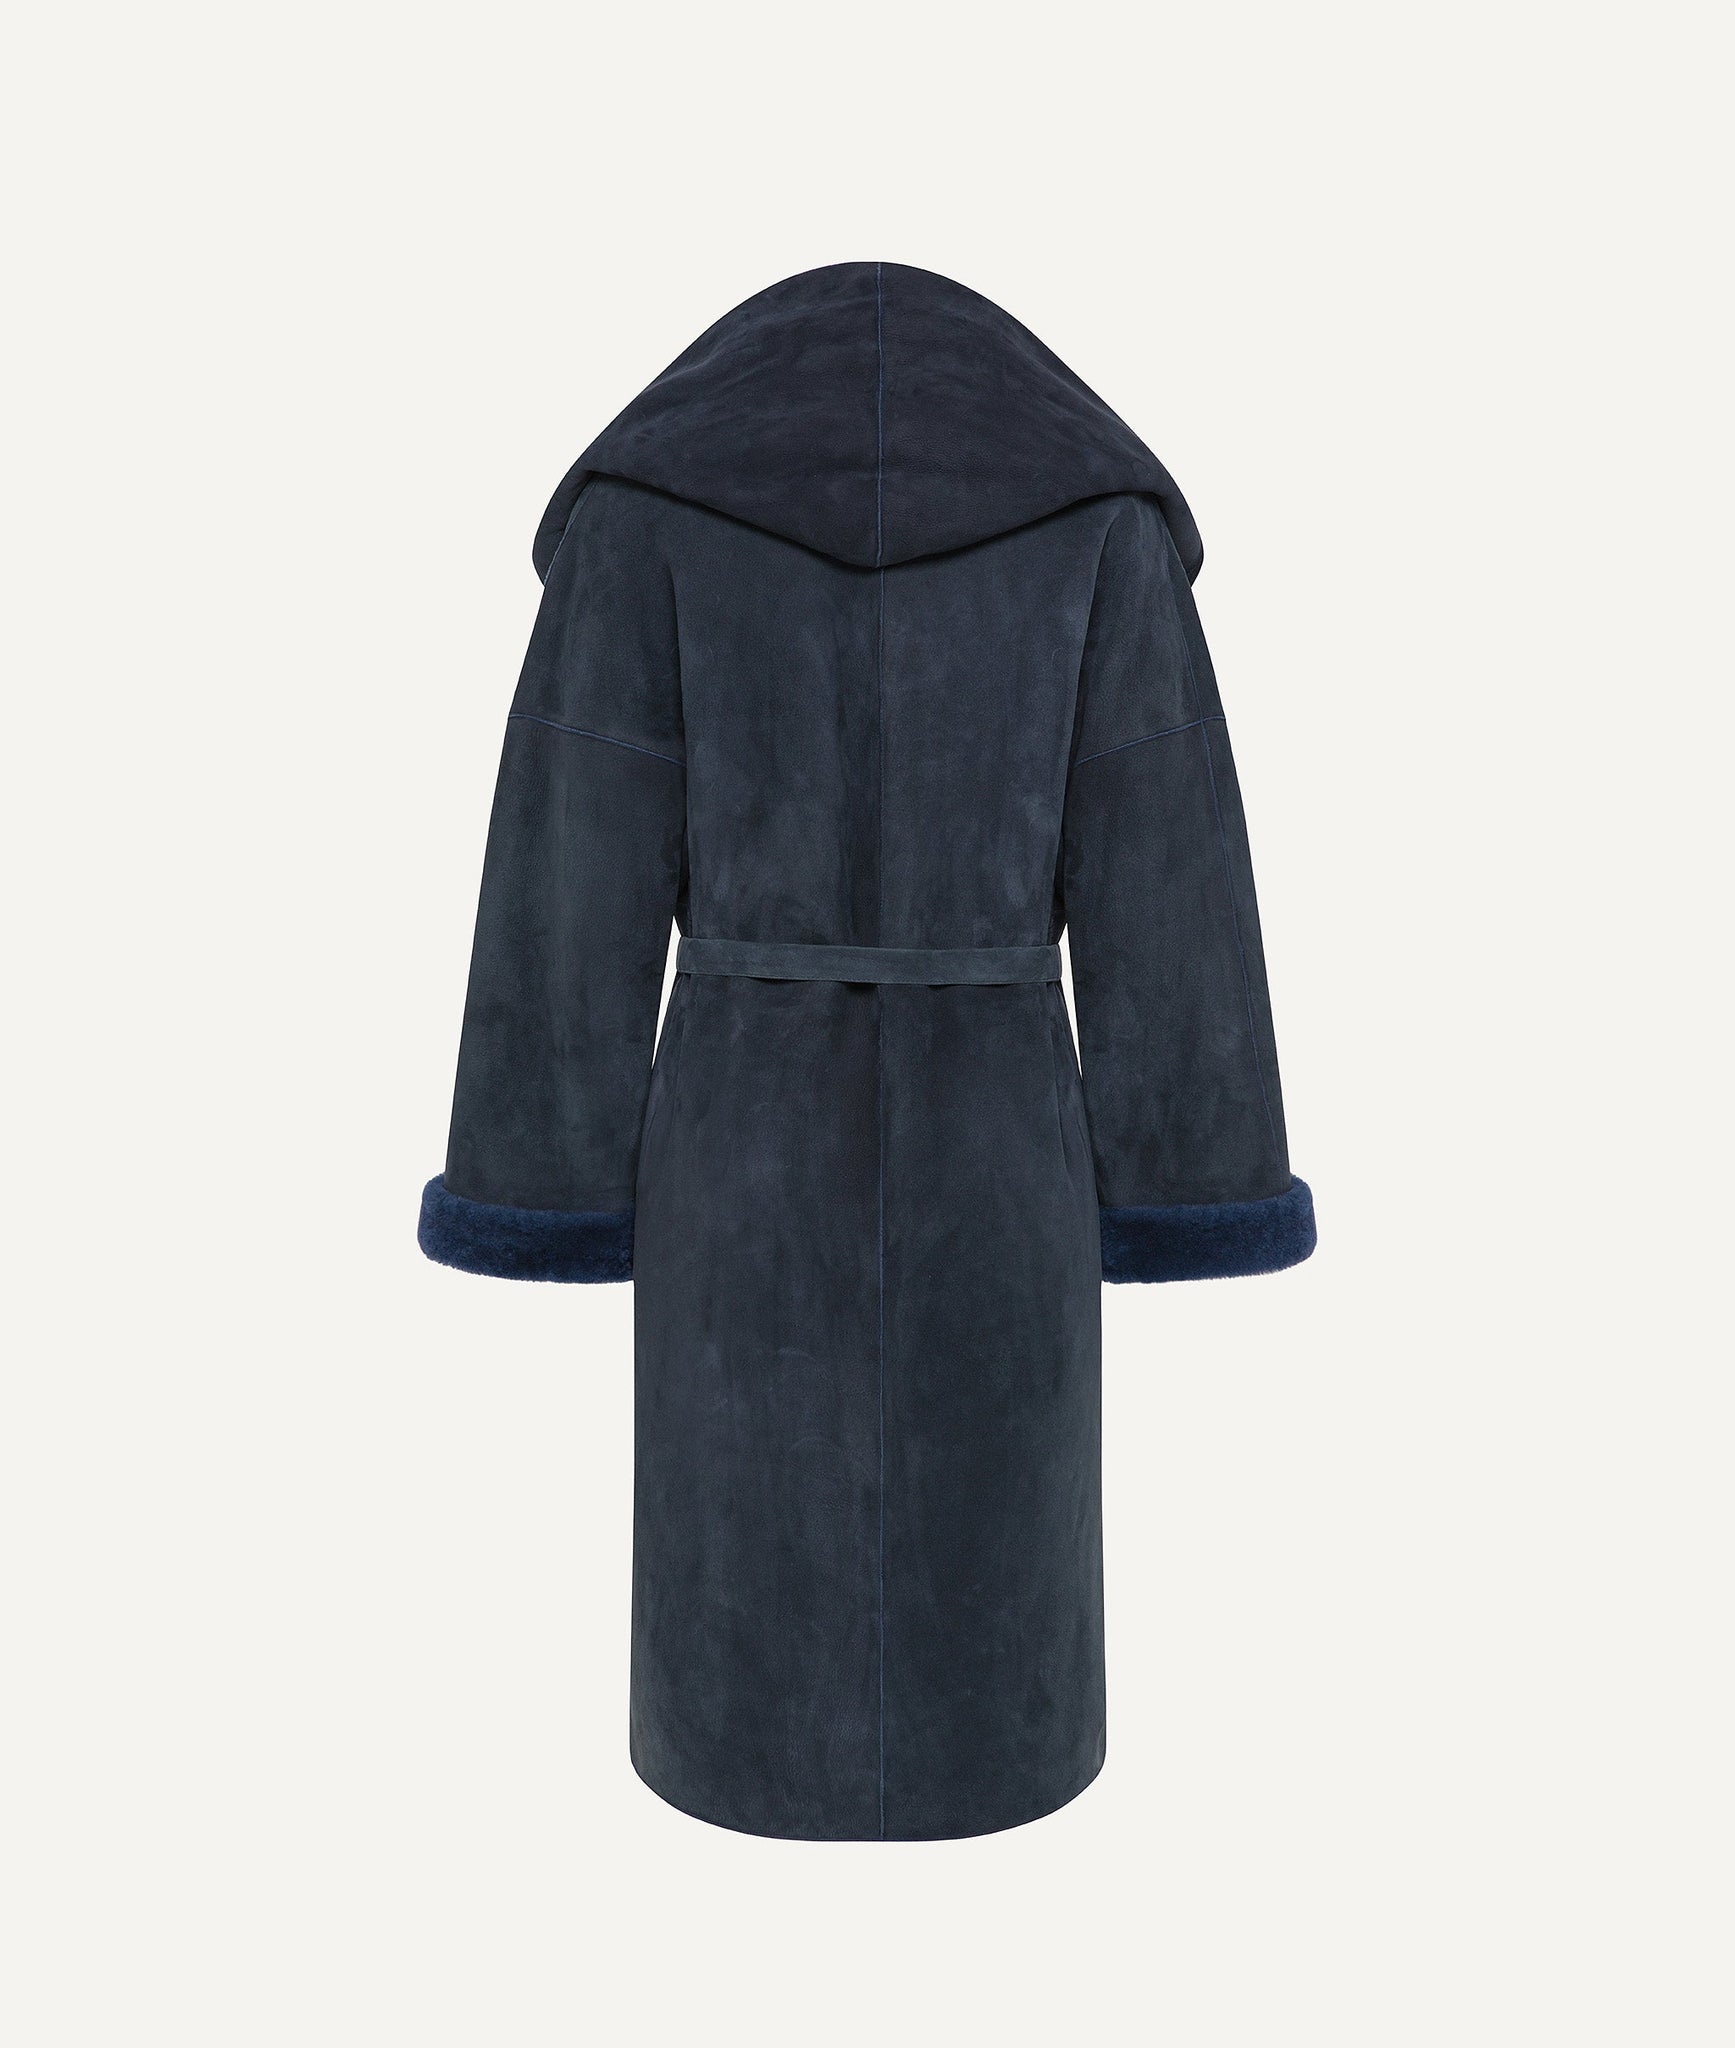 Kiton - Coat with Shearling in Suede